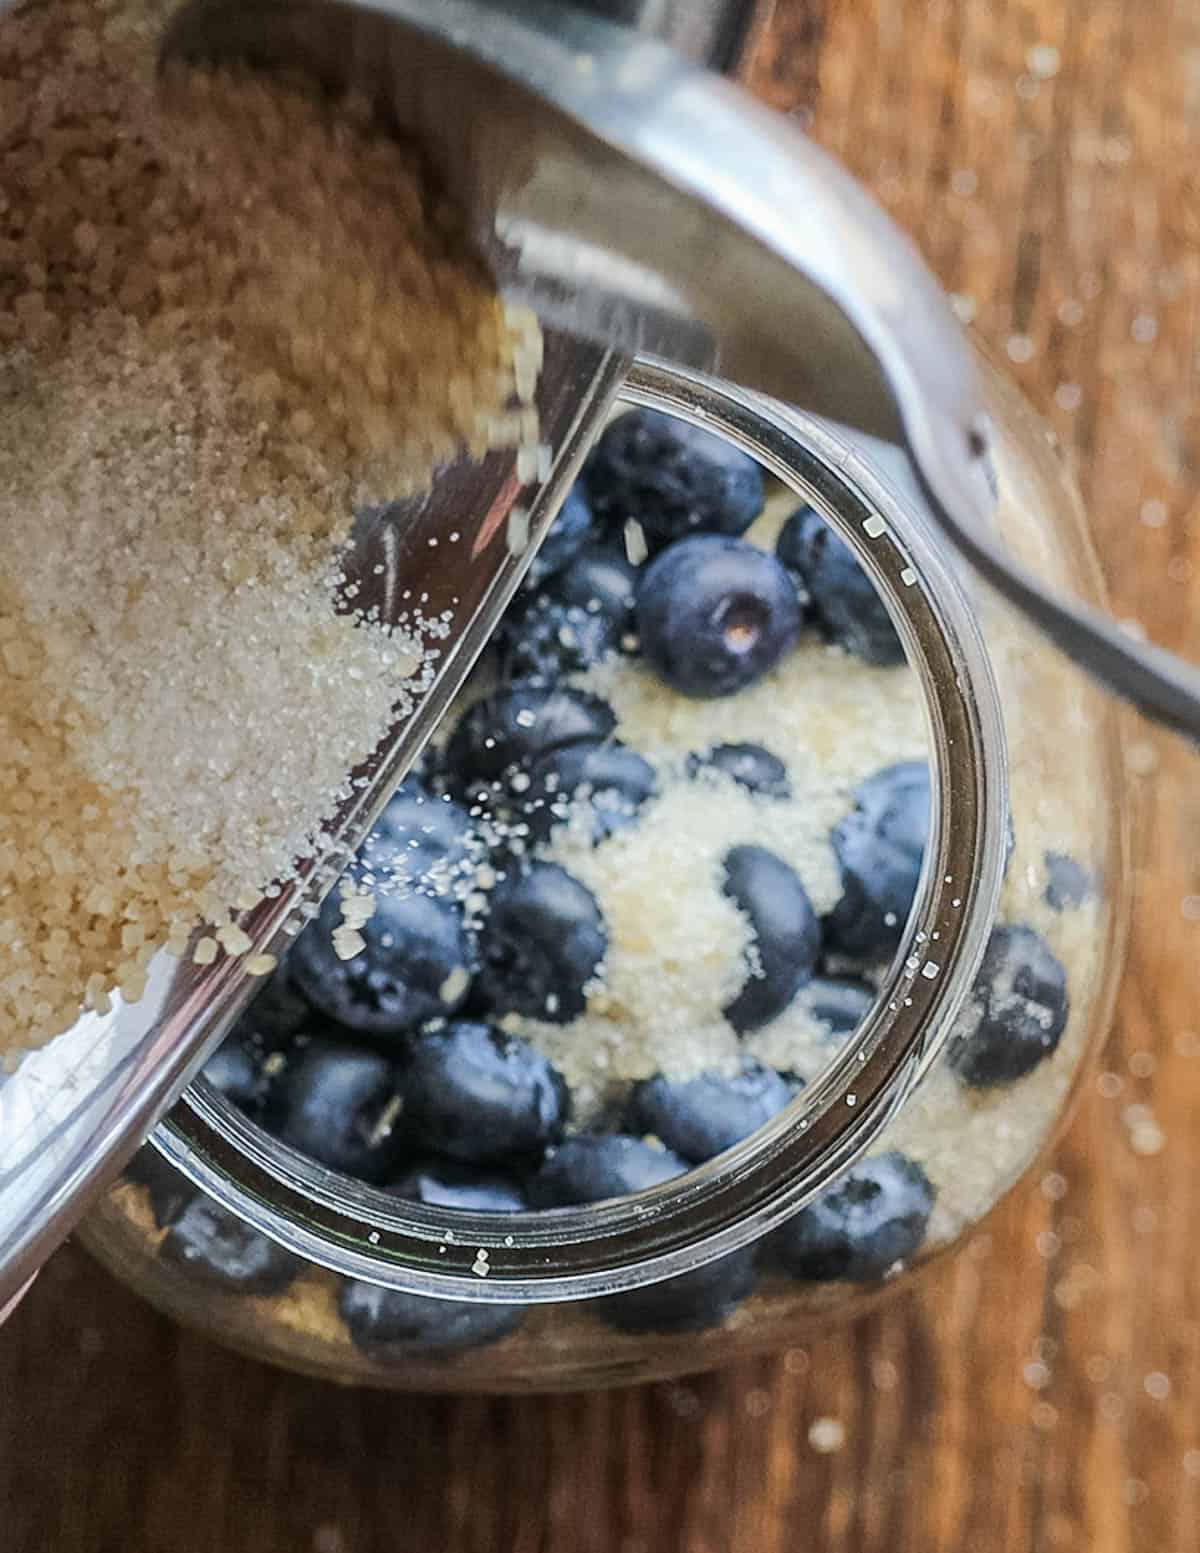 Mixing blueberries and turbinado sugar in a jar to ferment.